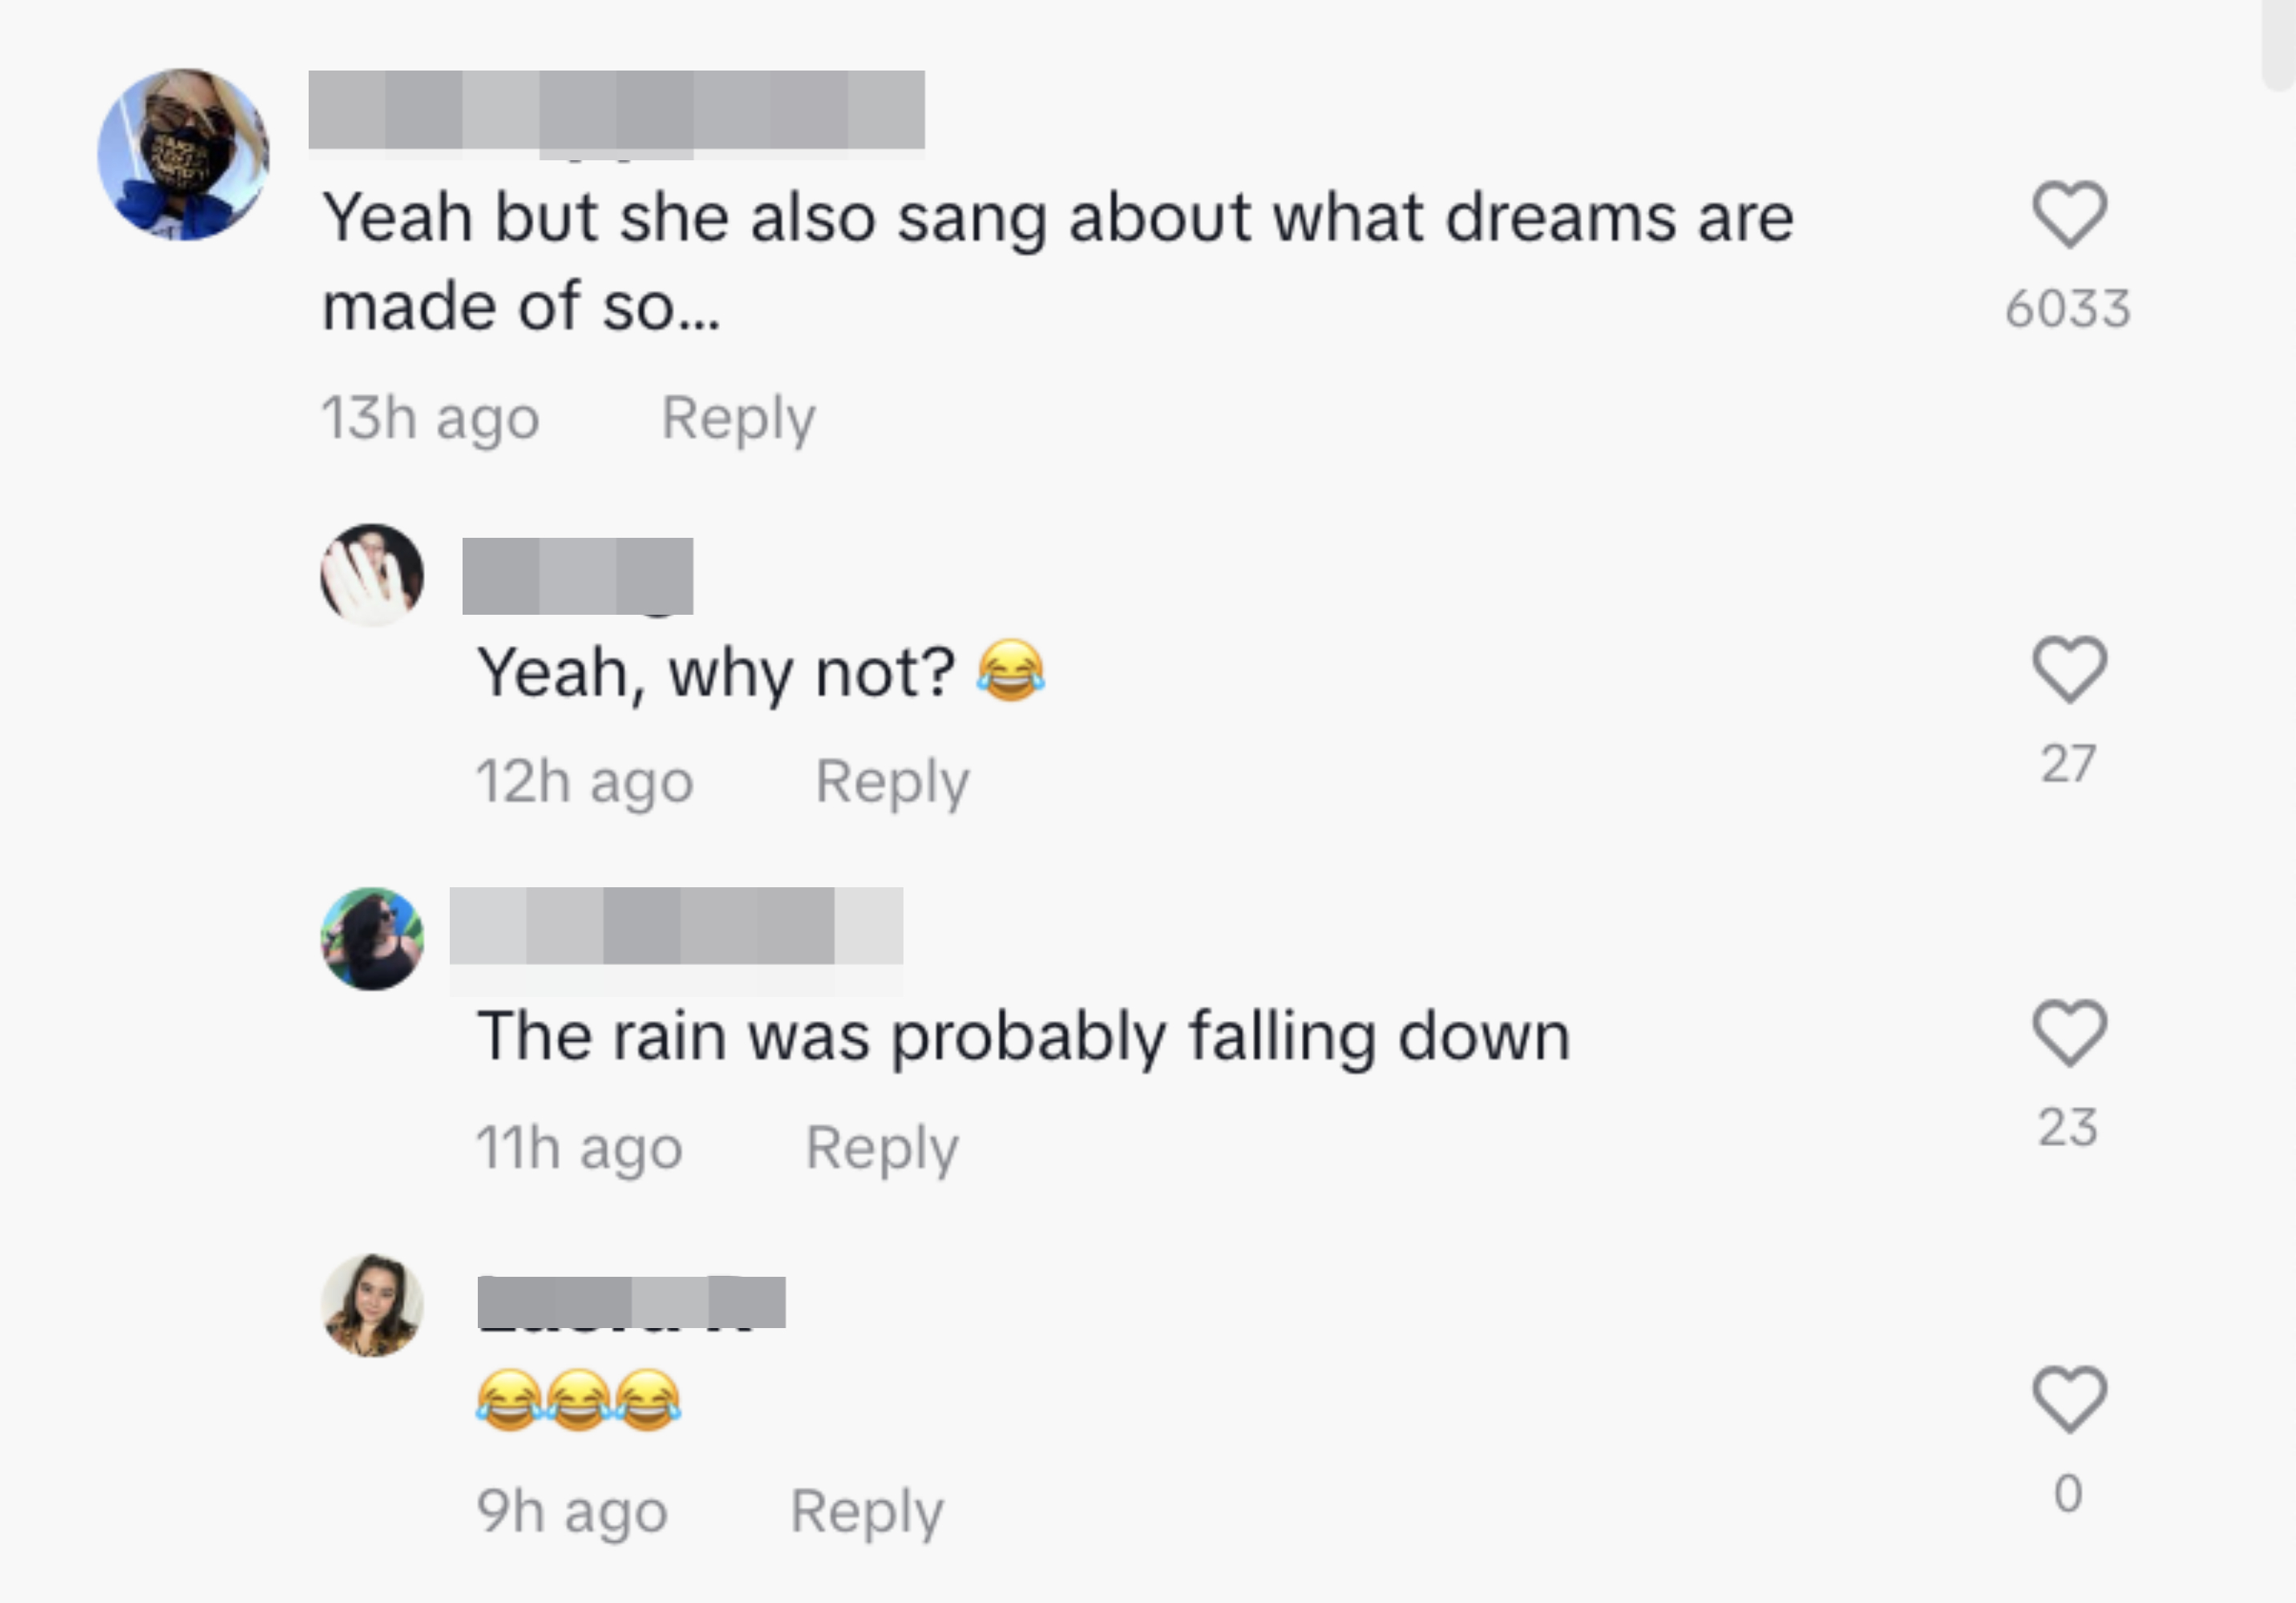 Jokes about Hilary&#x27;s songs &quot;What Dreams Are Made Of,&quot; &quot;Why Not,&quot; and &quot;Coming Clean&quot; including &quot;Yeah but she also sang about what dreams are made of so...&quot;